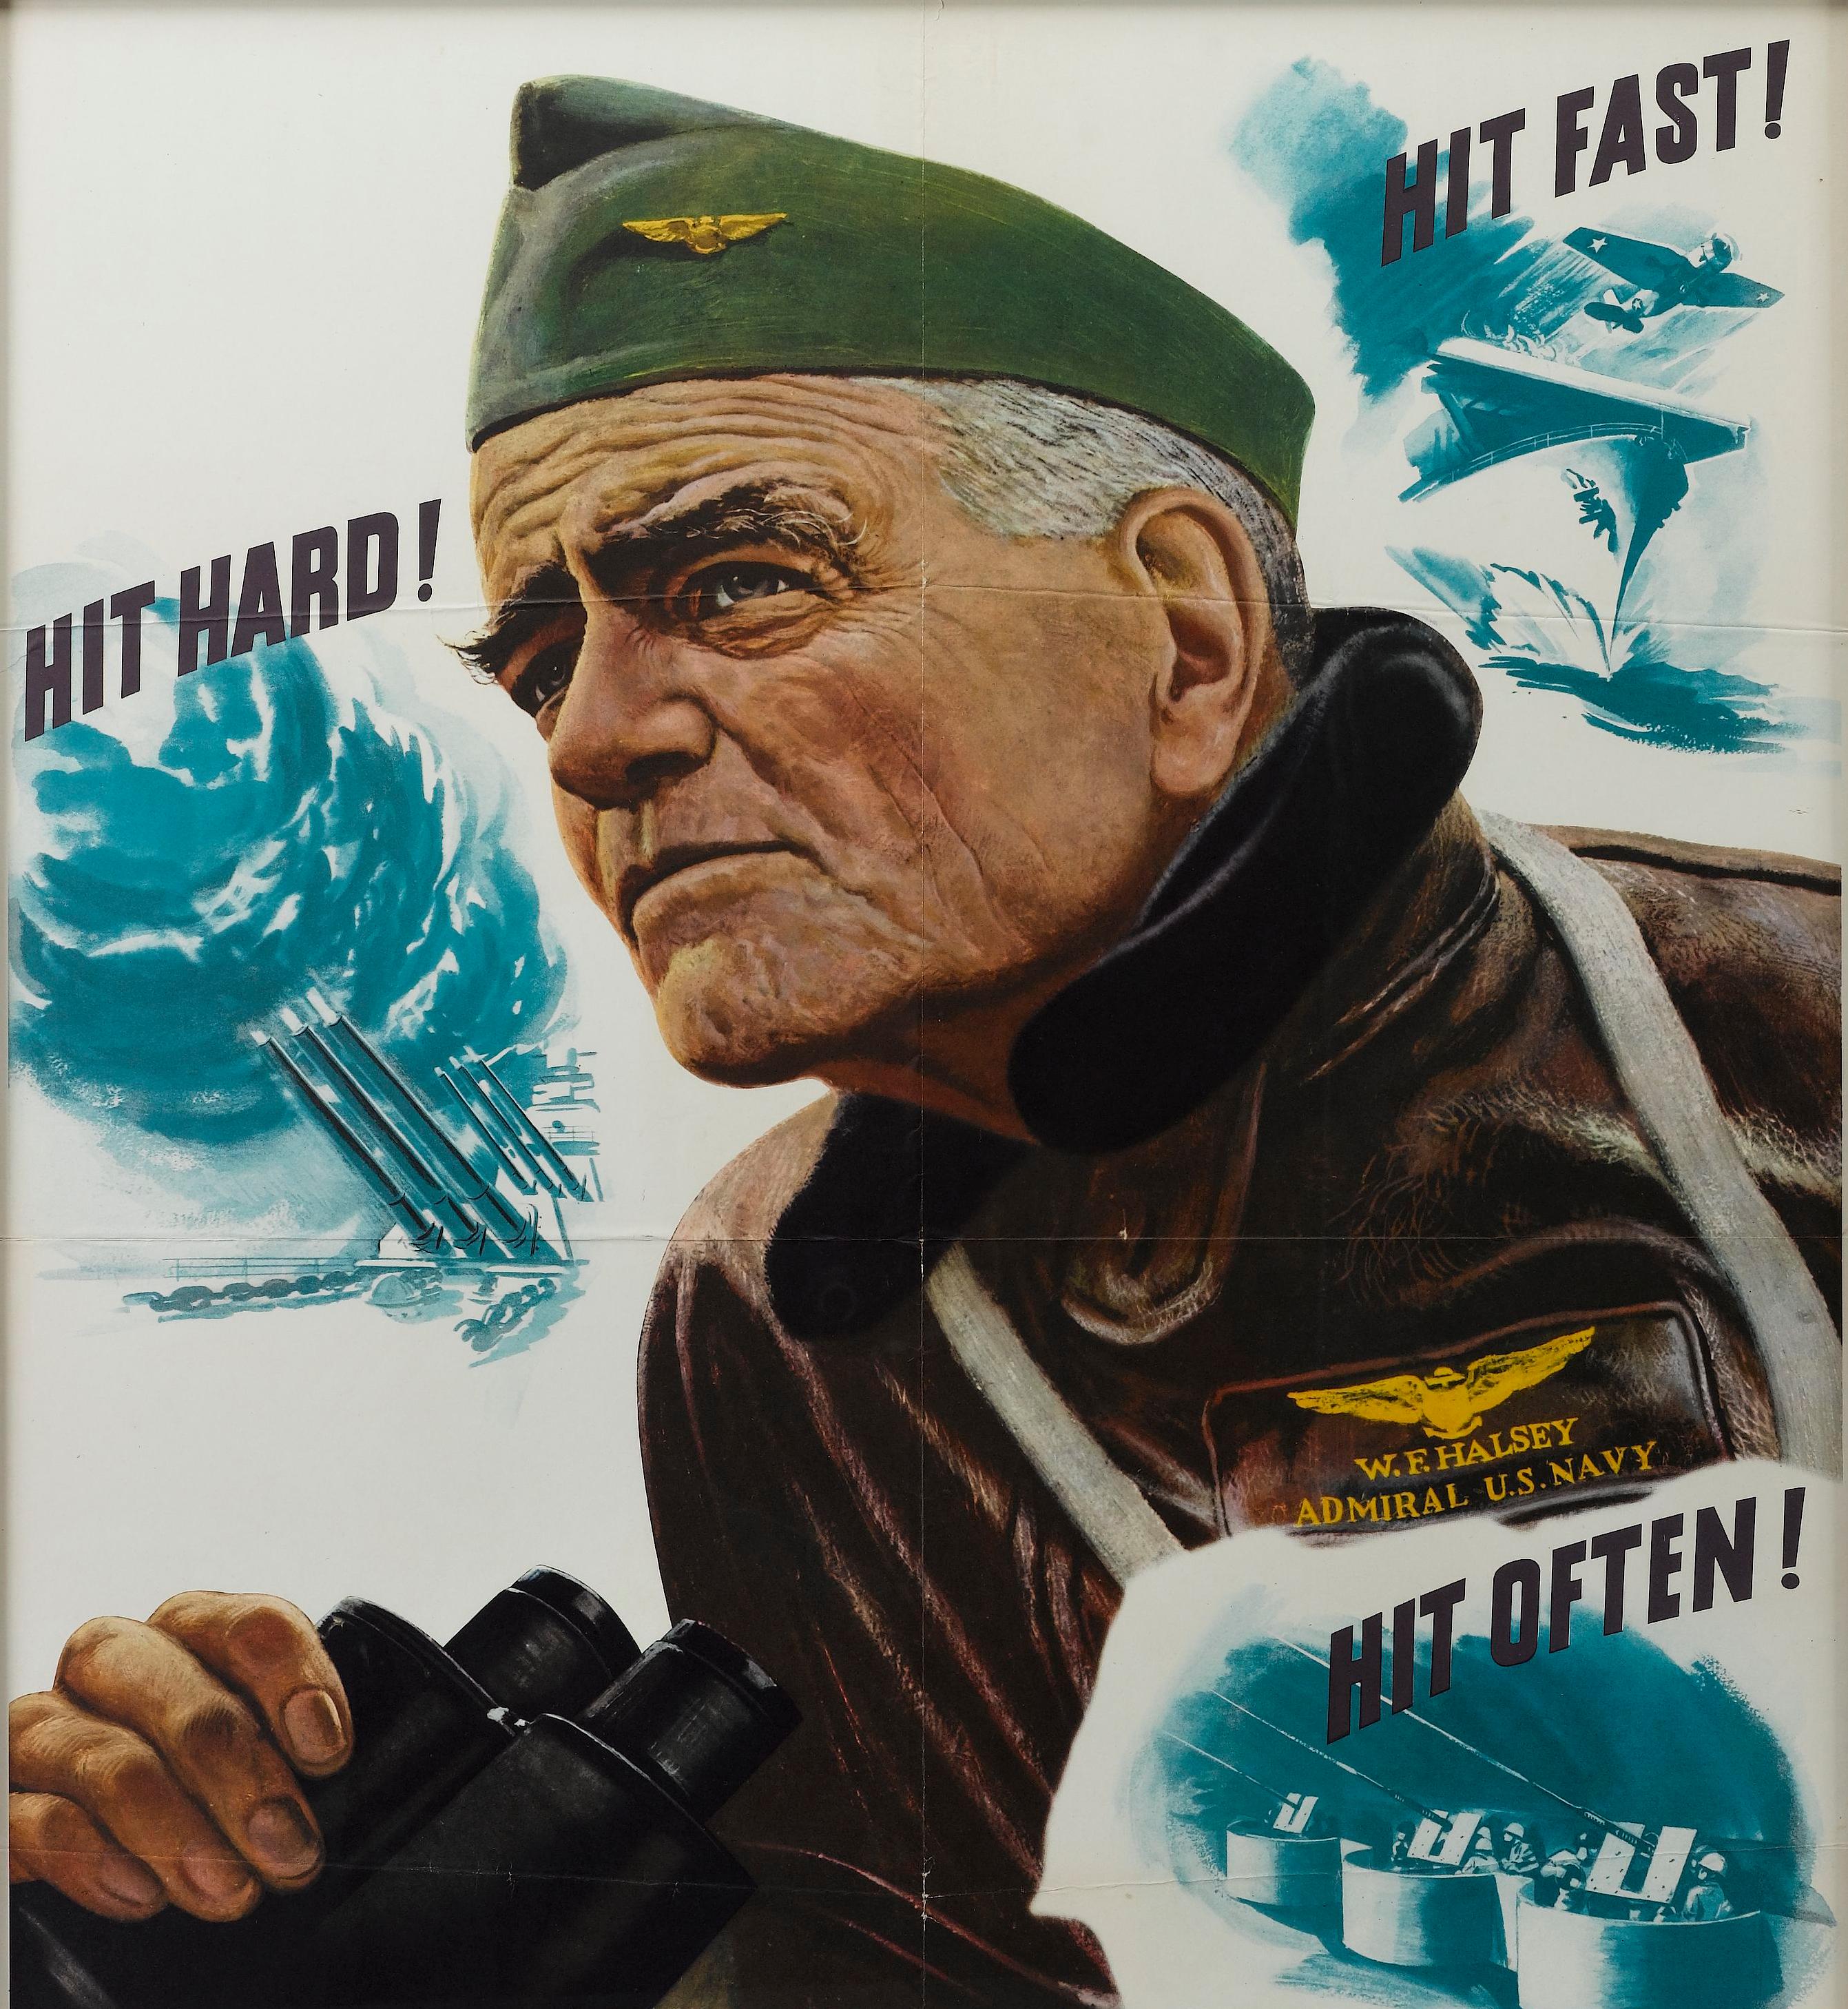 Presented is an original WWII Navy propaganda poster, illustrated by John Falter. The poster illustrates Admiral William Halsey at center, as he drops his binoculars to look into the distance. Halsey is surrounded by three blue-toned vignettes of